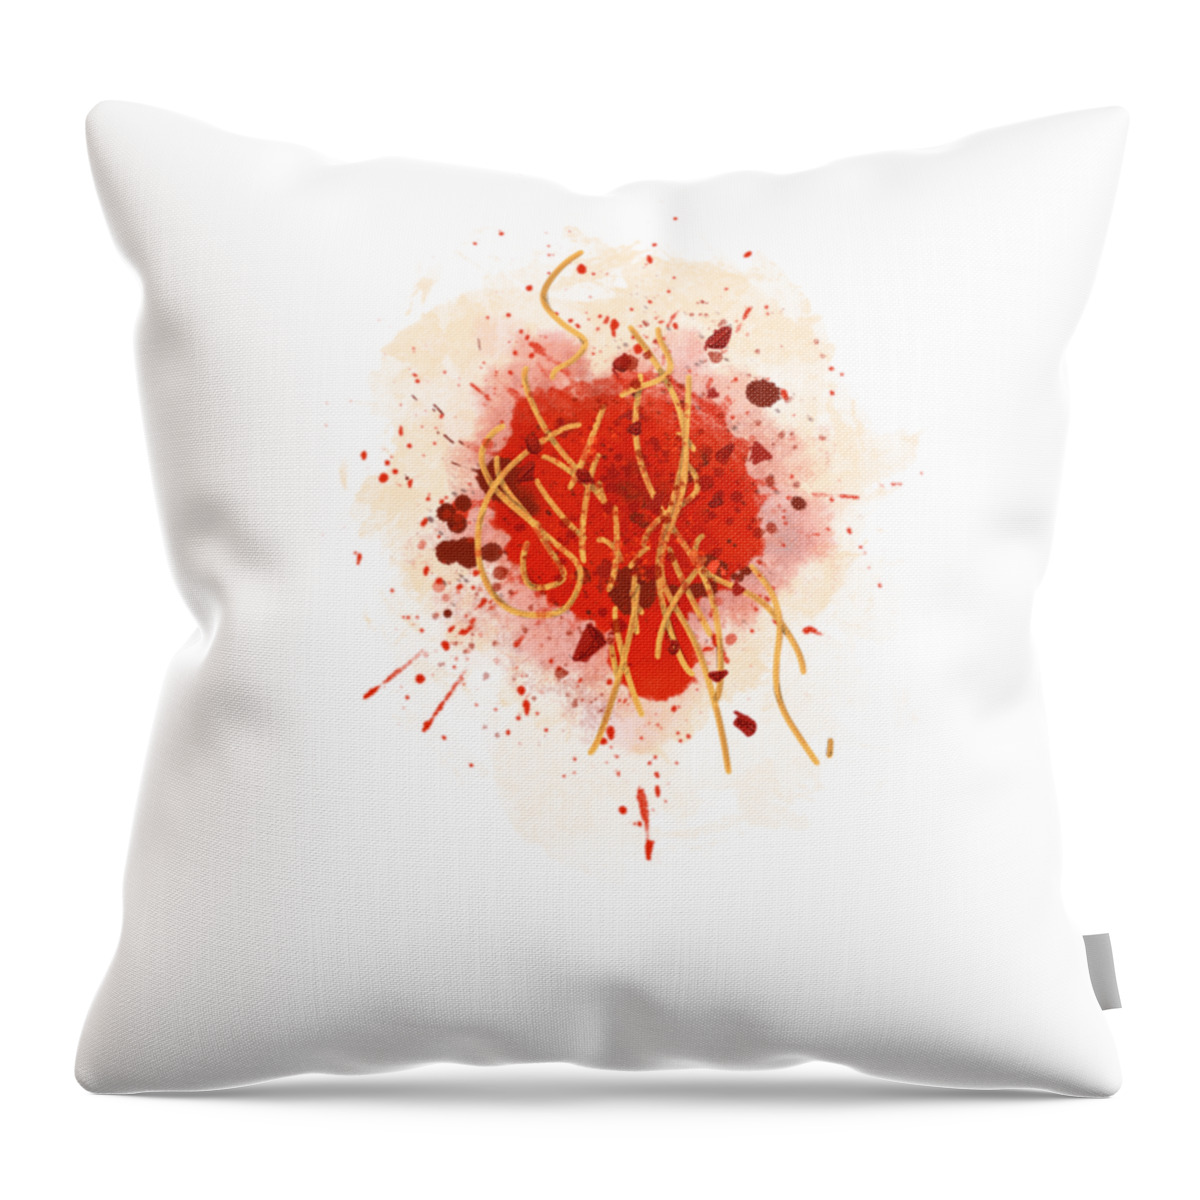 Mom's Spaghetti Throw Pillow featuring the drawing Mom's Spaghetti by Ludwig Van Bacon